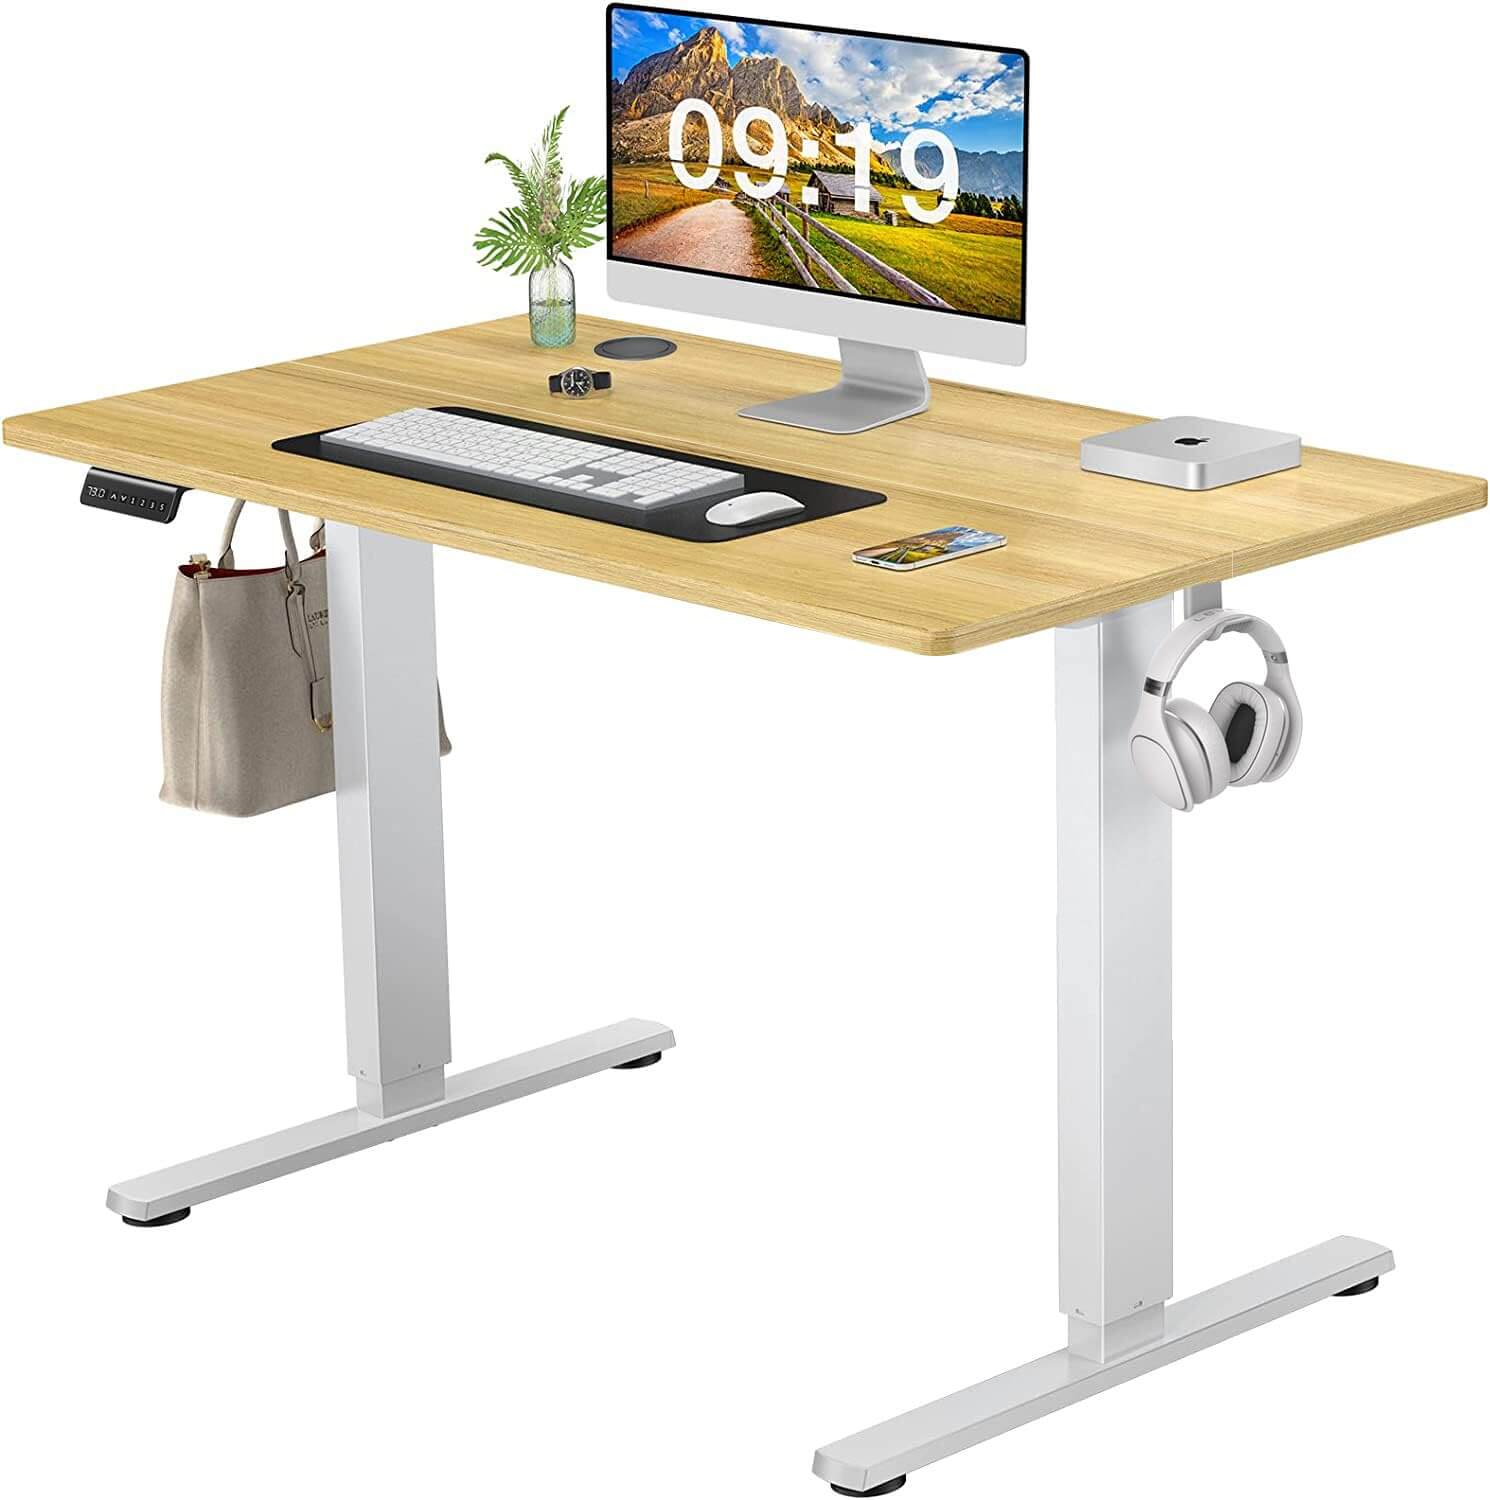 FEZIBO 60 x 24 inch Height Adjustable Electric Standing Desk with Double Drawer, Stand Up Table with Storage Shelf, Sit Stand Desk with Splice Board